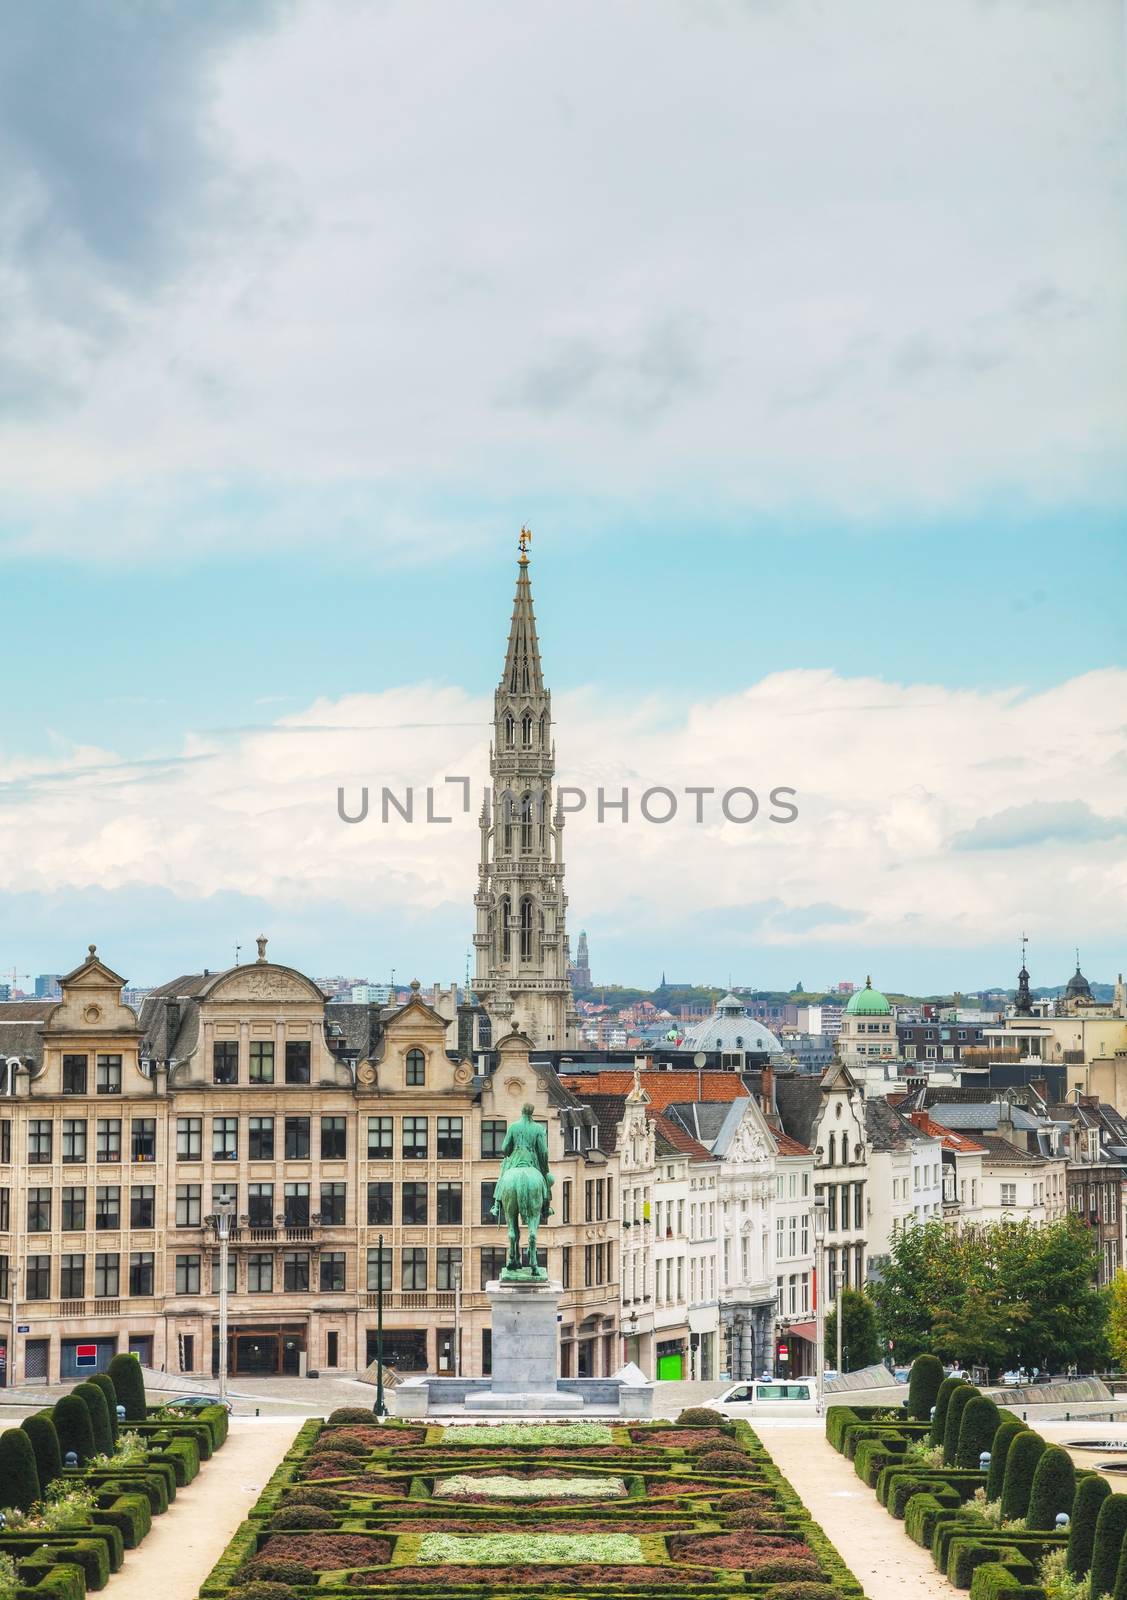 Overview of Brussels, Belgium by AndreyKr